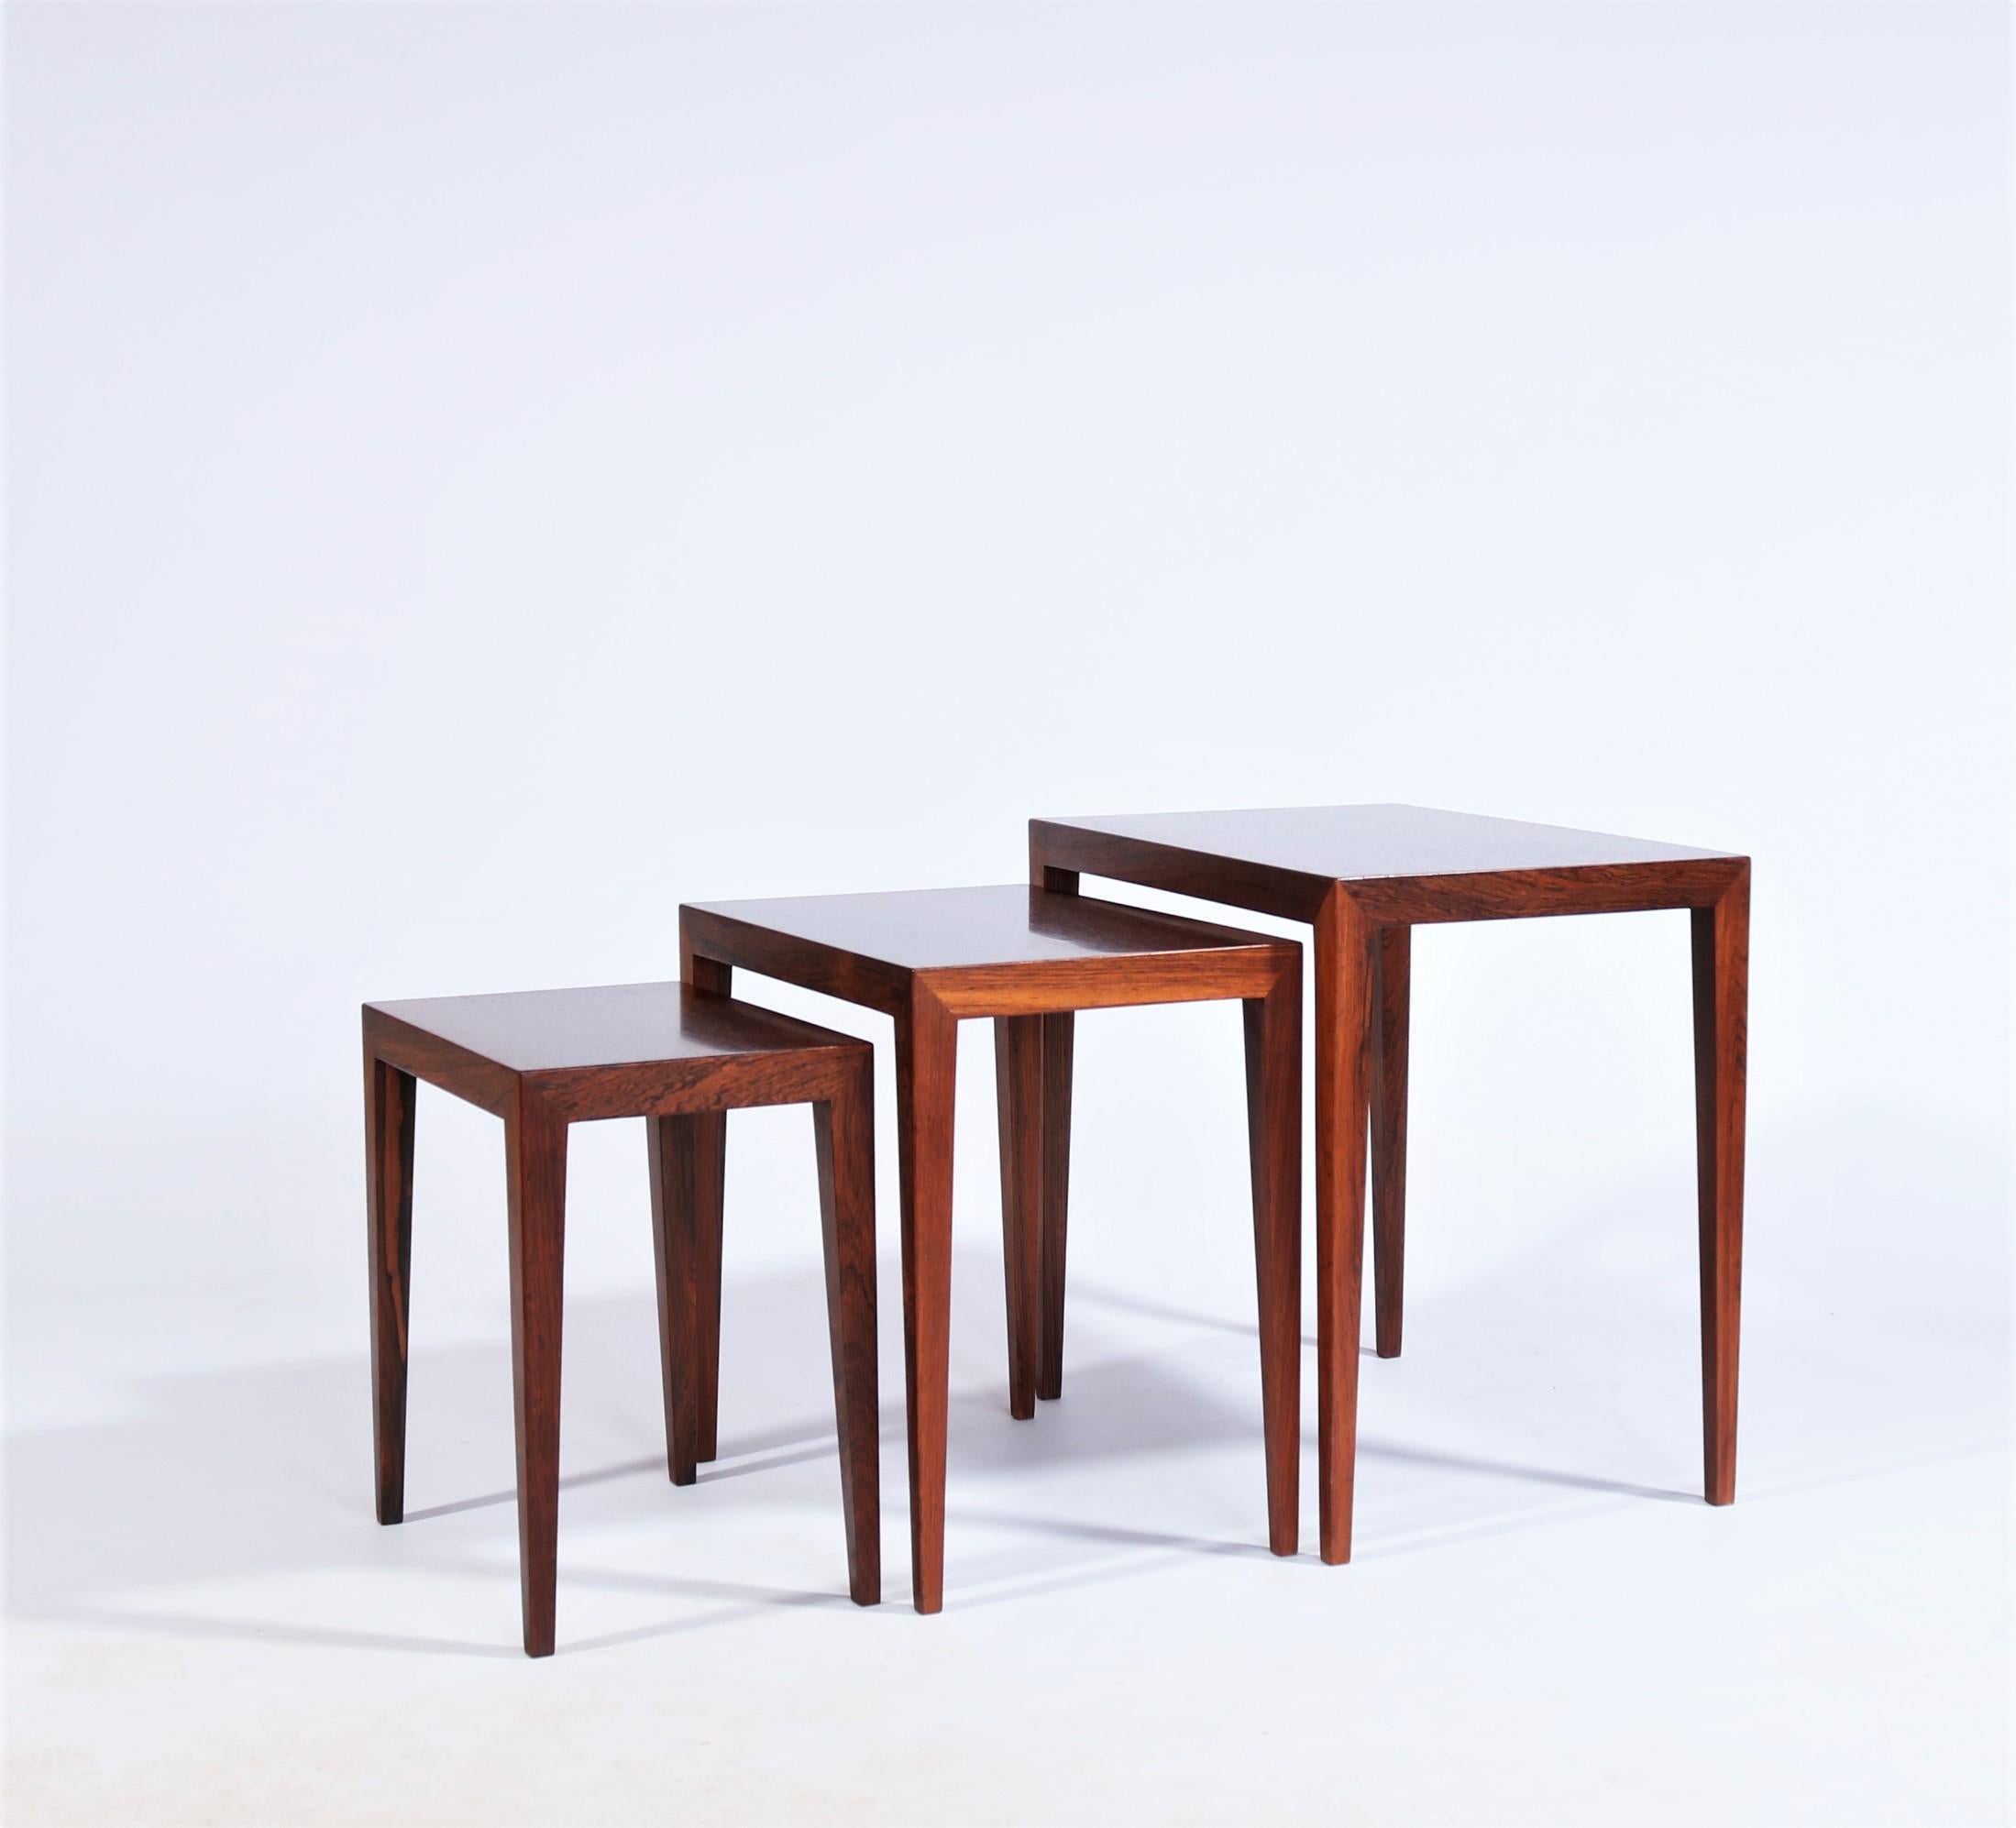 Simplistic and sophisticated set of nesting tables in beautifully grained rosewood designed by Severin Hansen Jr. for Haslev Møbelsnedskeri, Denmark, 1950s. The tables are made from beautifully grained rosewood veneer and the design is simply